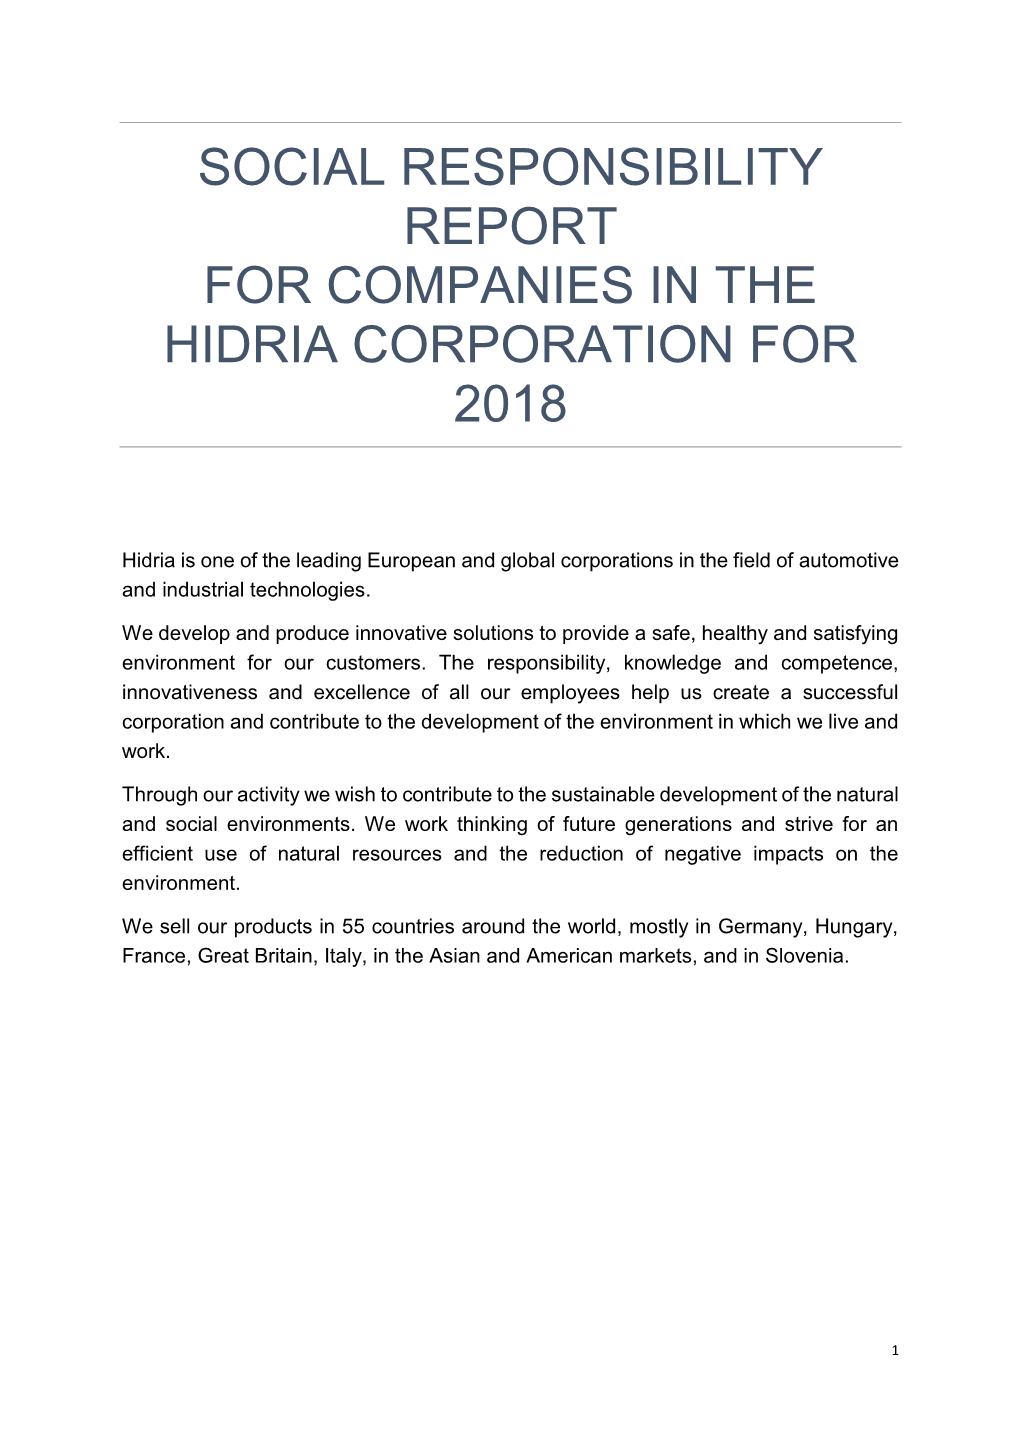 Social Responsibility Report for Companies in the Hidria Corporation for 2018